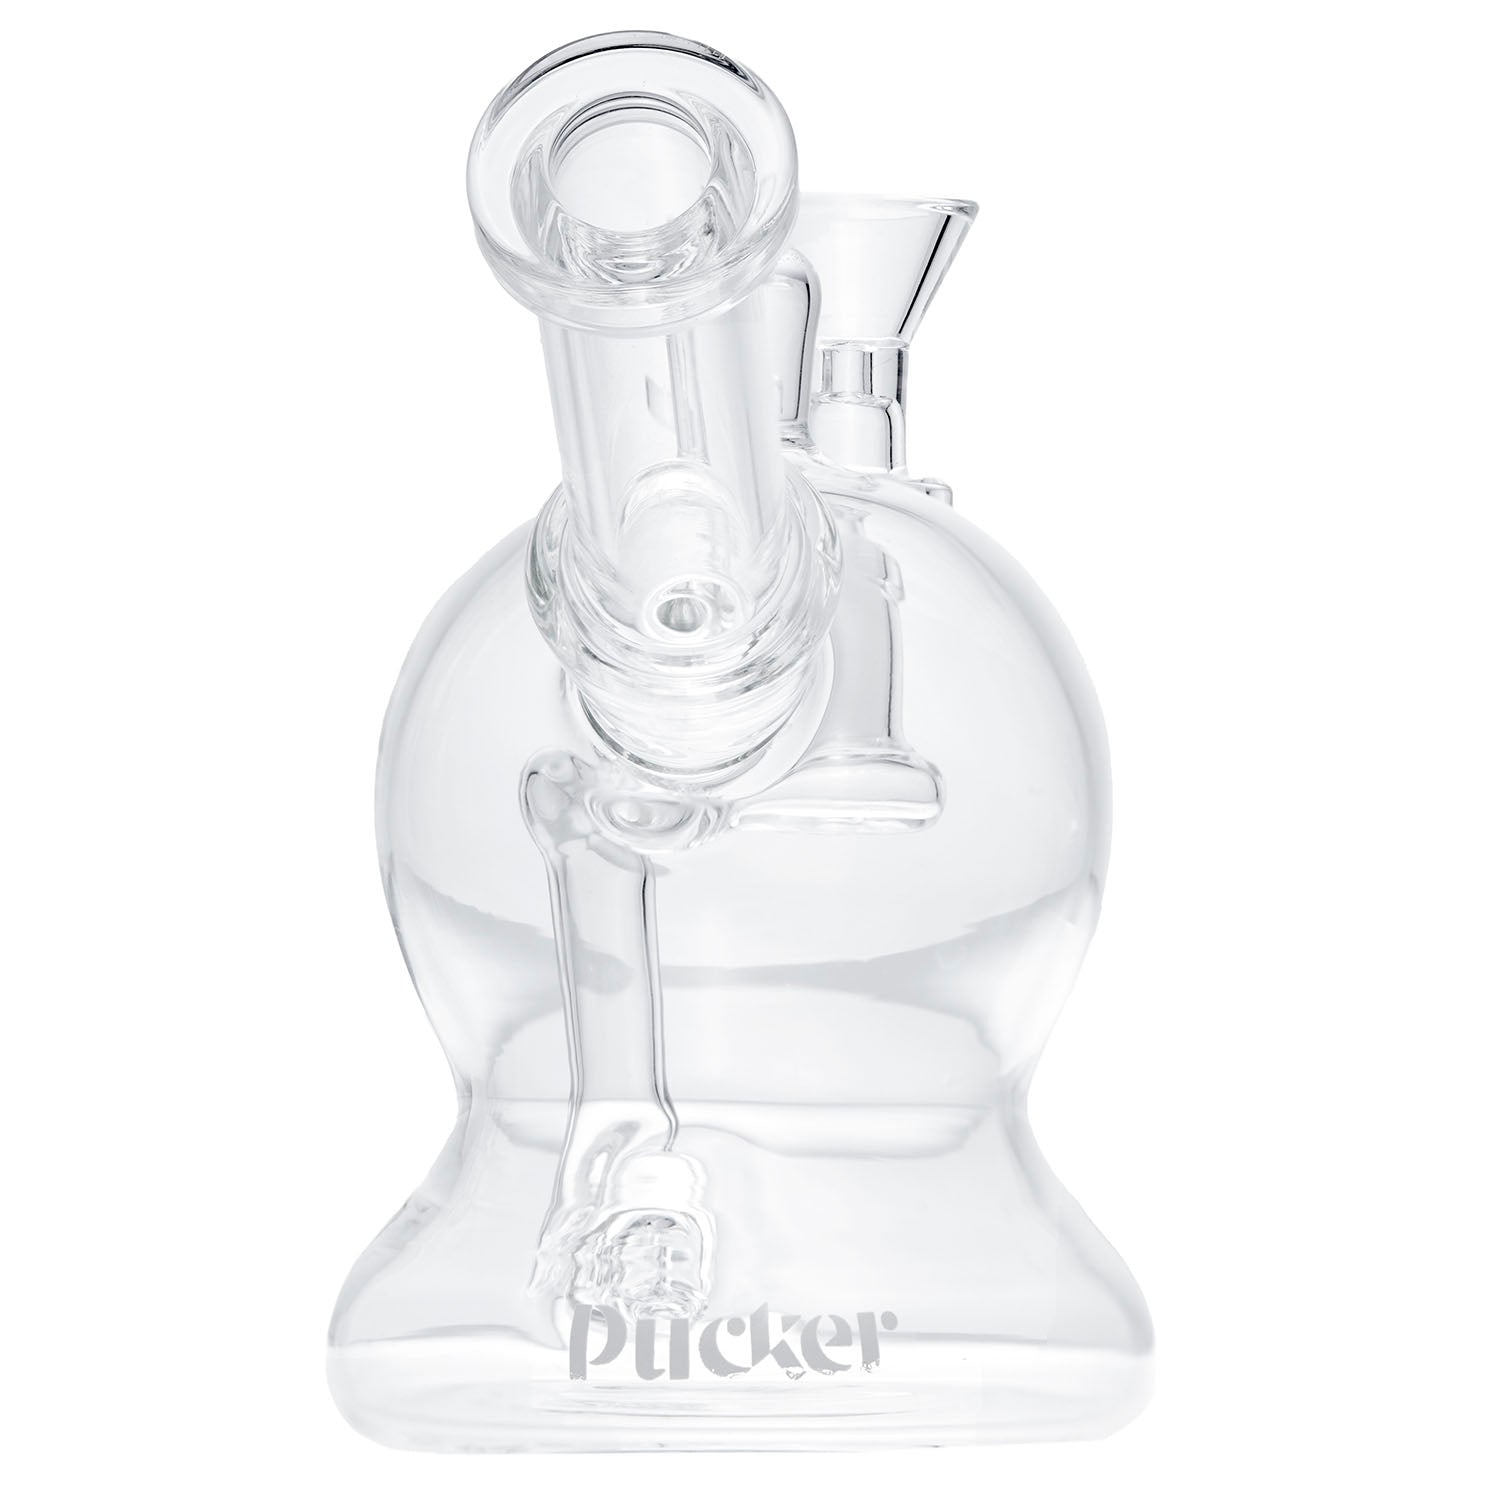 PUCKER "Ghost" Water Smoking Bong Pipe - Clear